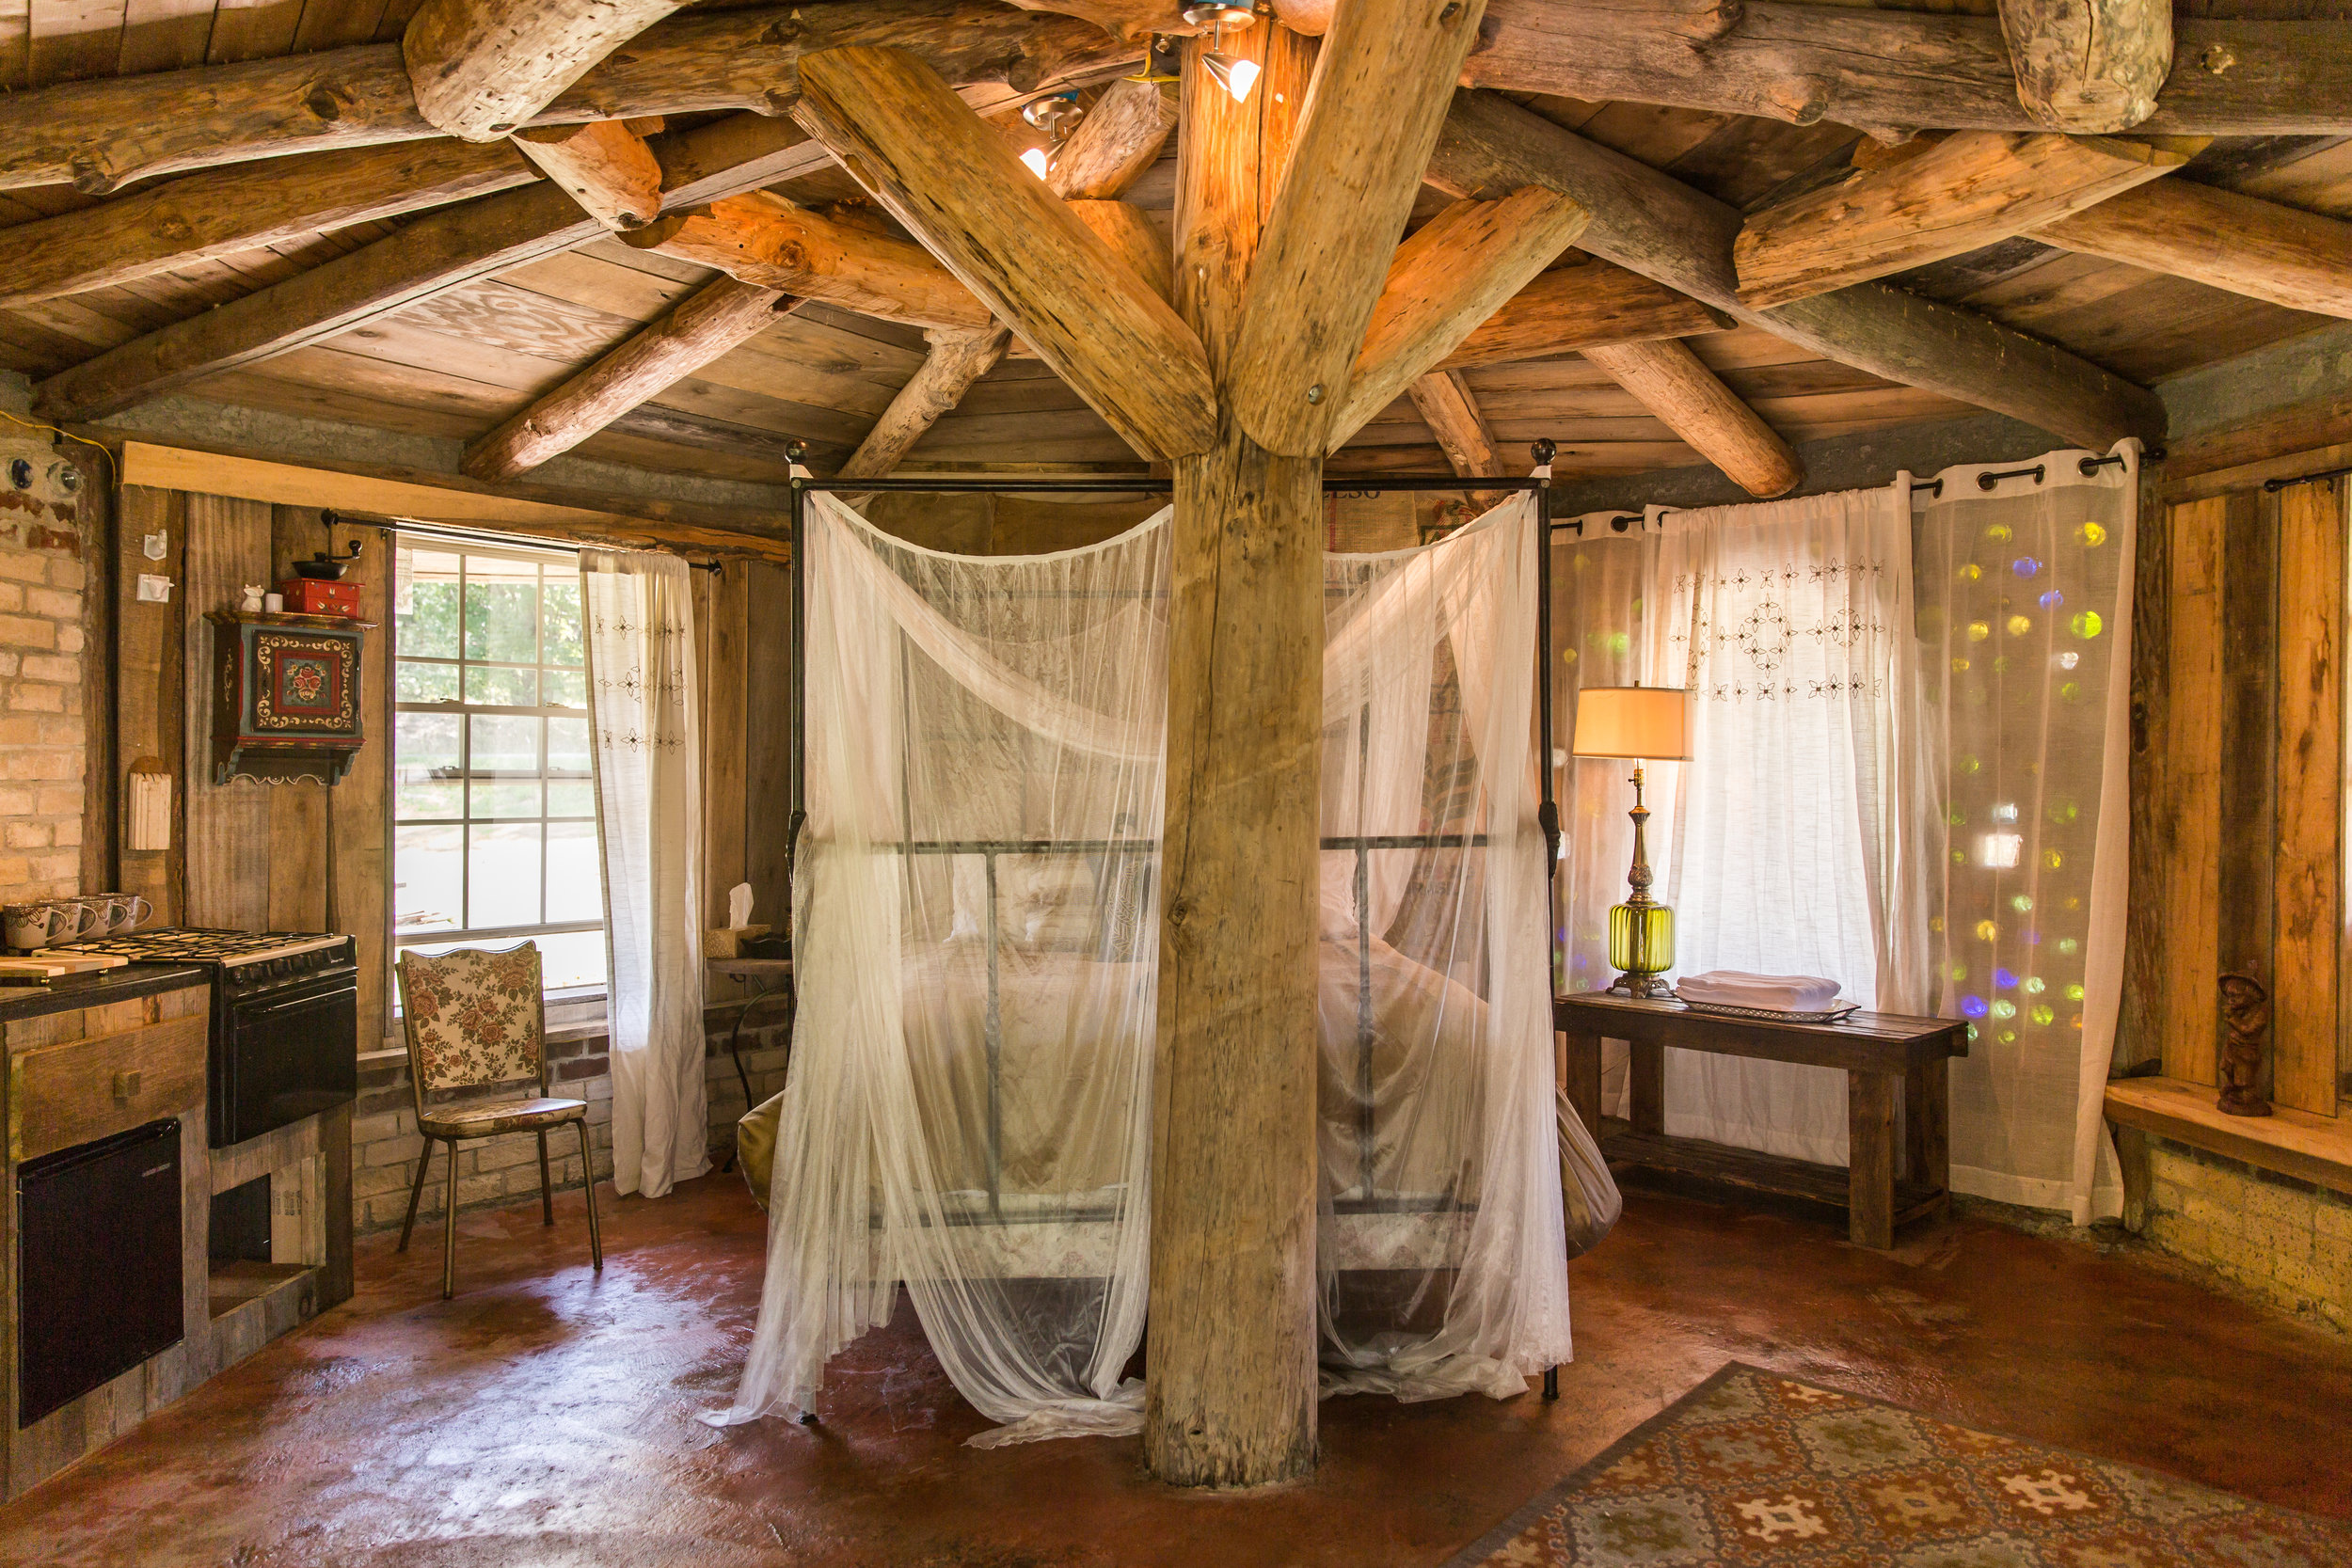 Book the Hobbit House in the Hallow on Airbnb